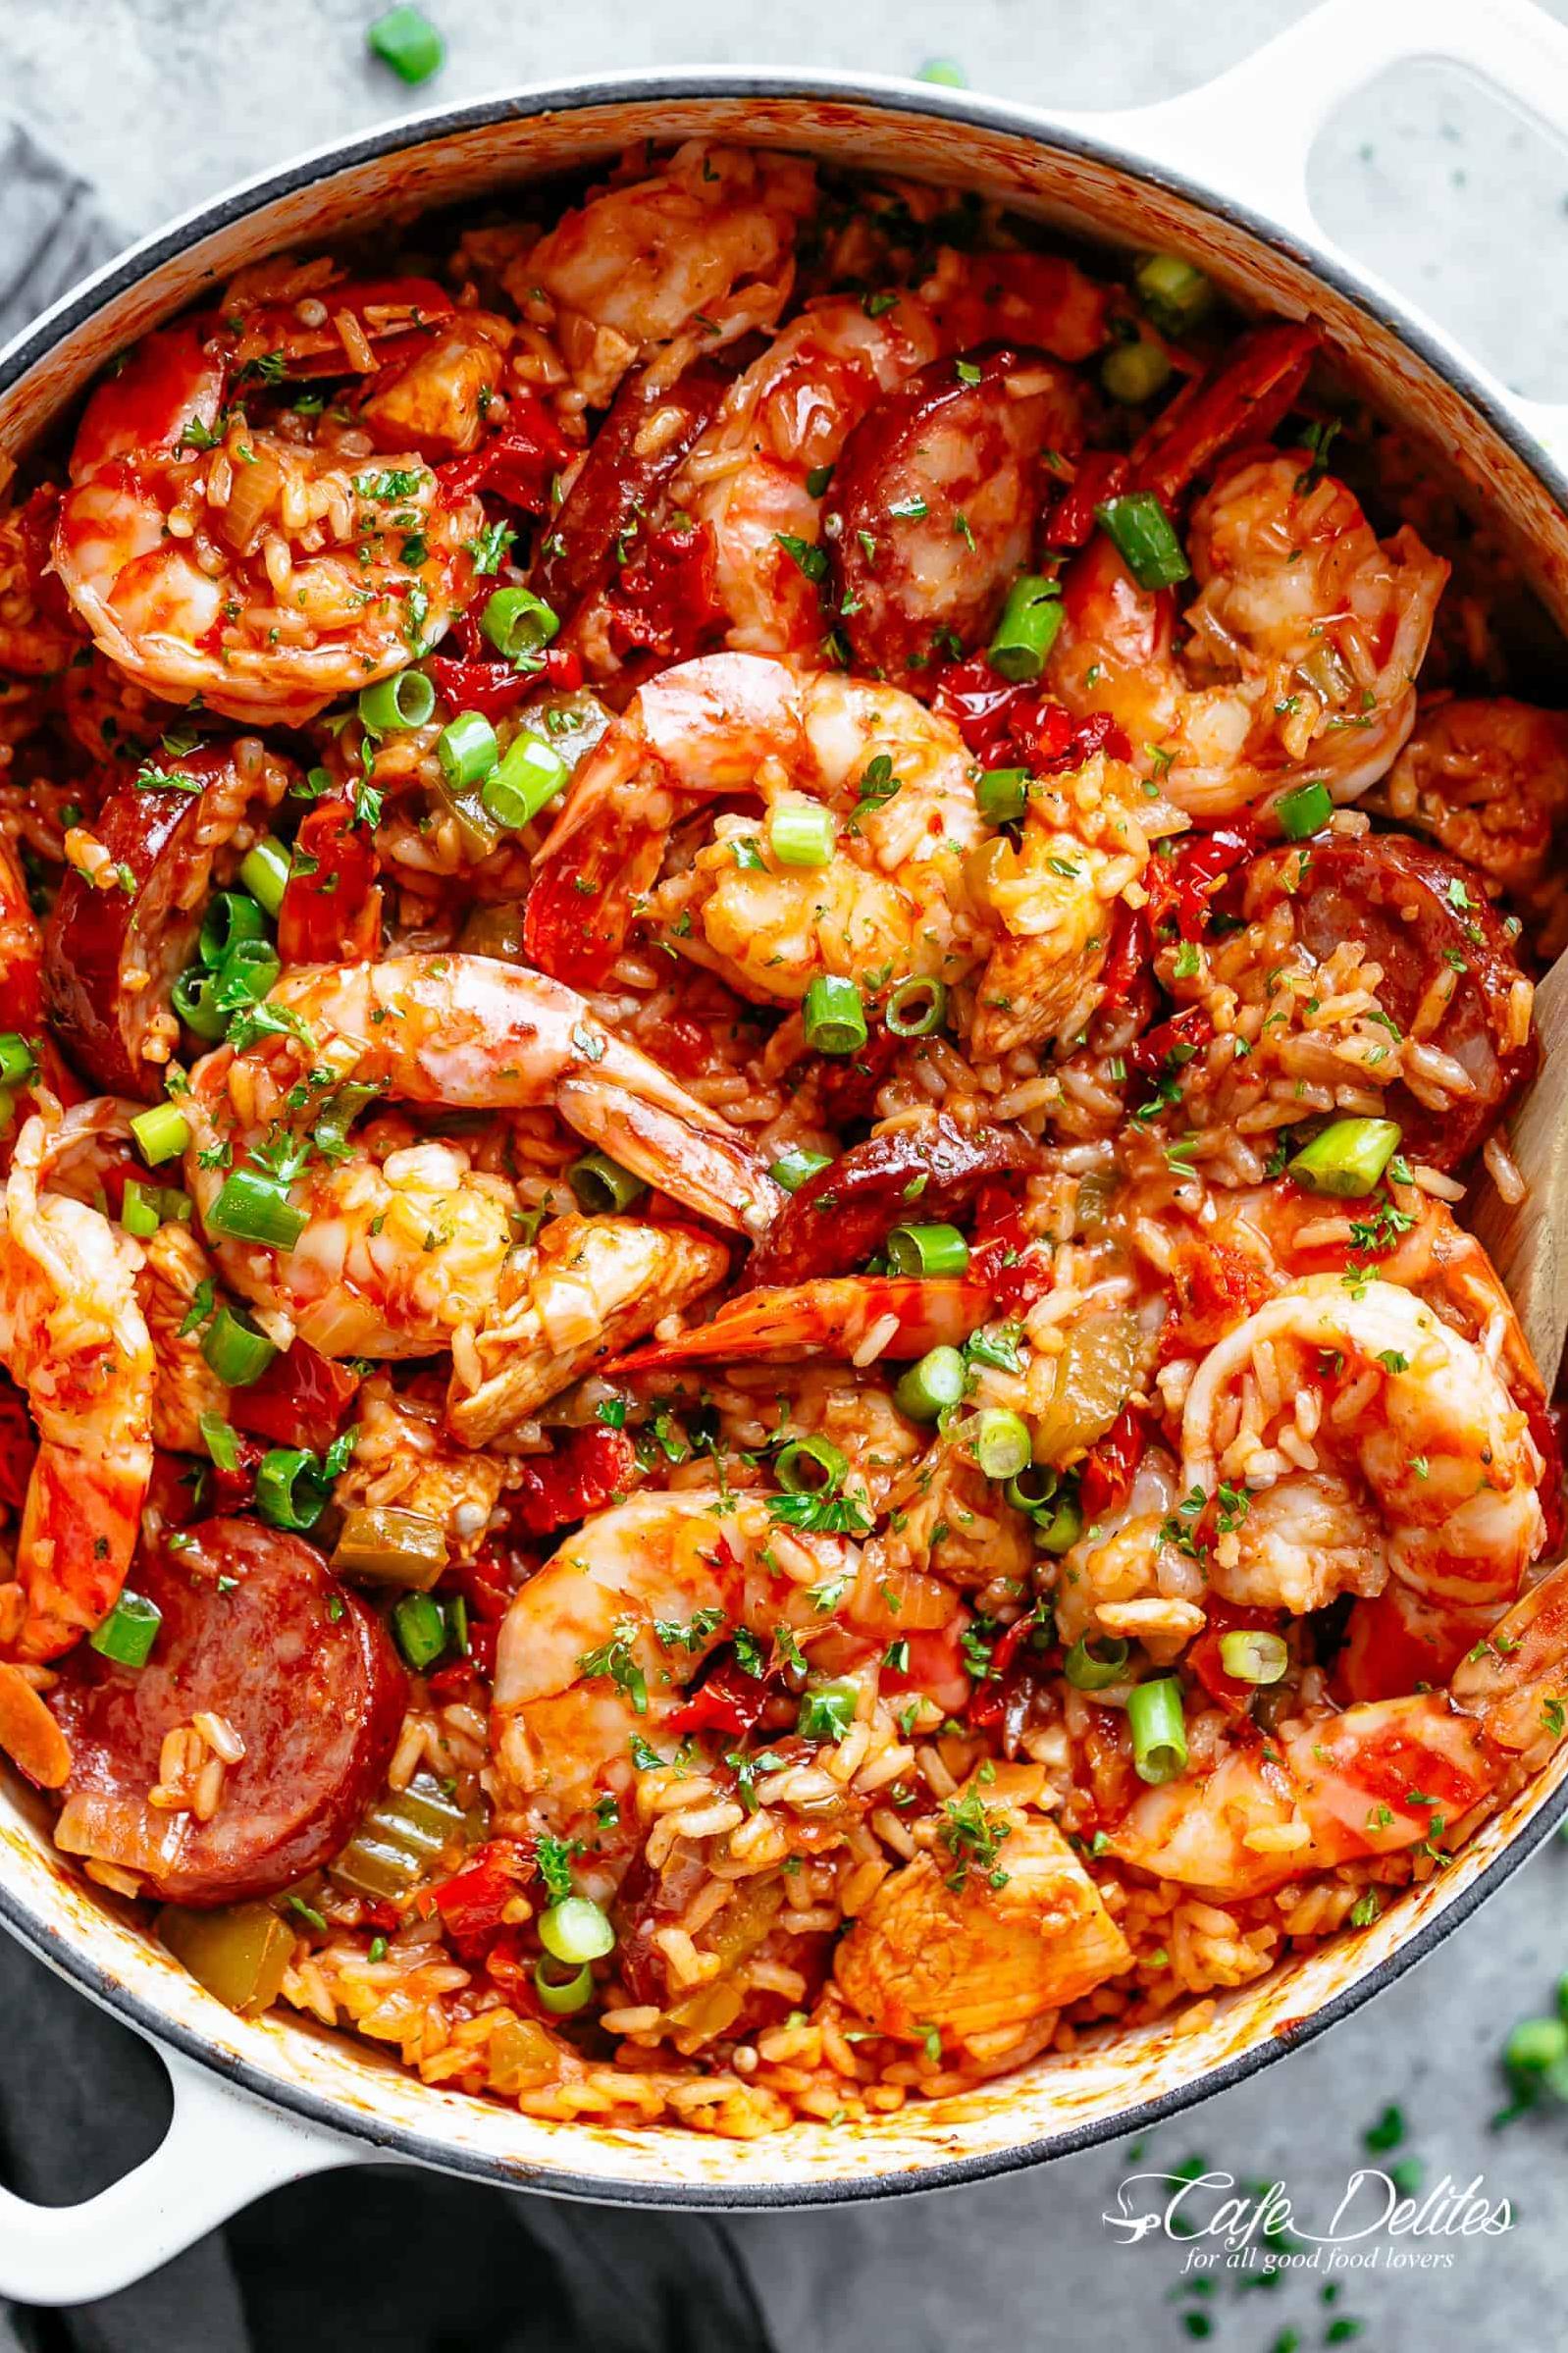  If you're a fan of Cajun cuisine and spicy foods, this Jambalaya won't disappoint.